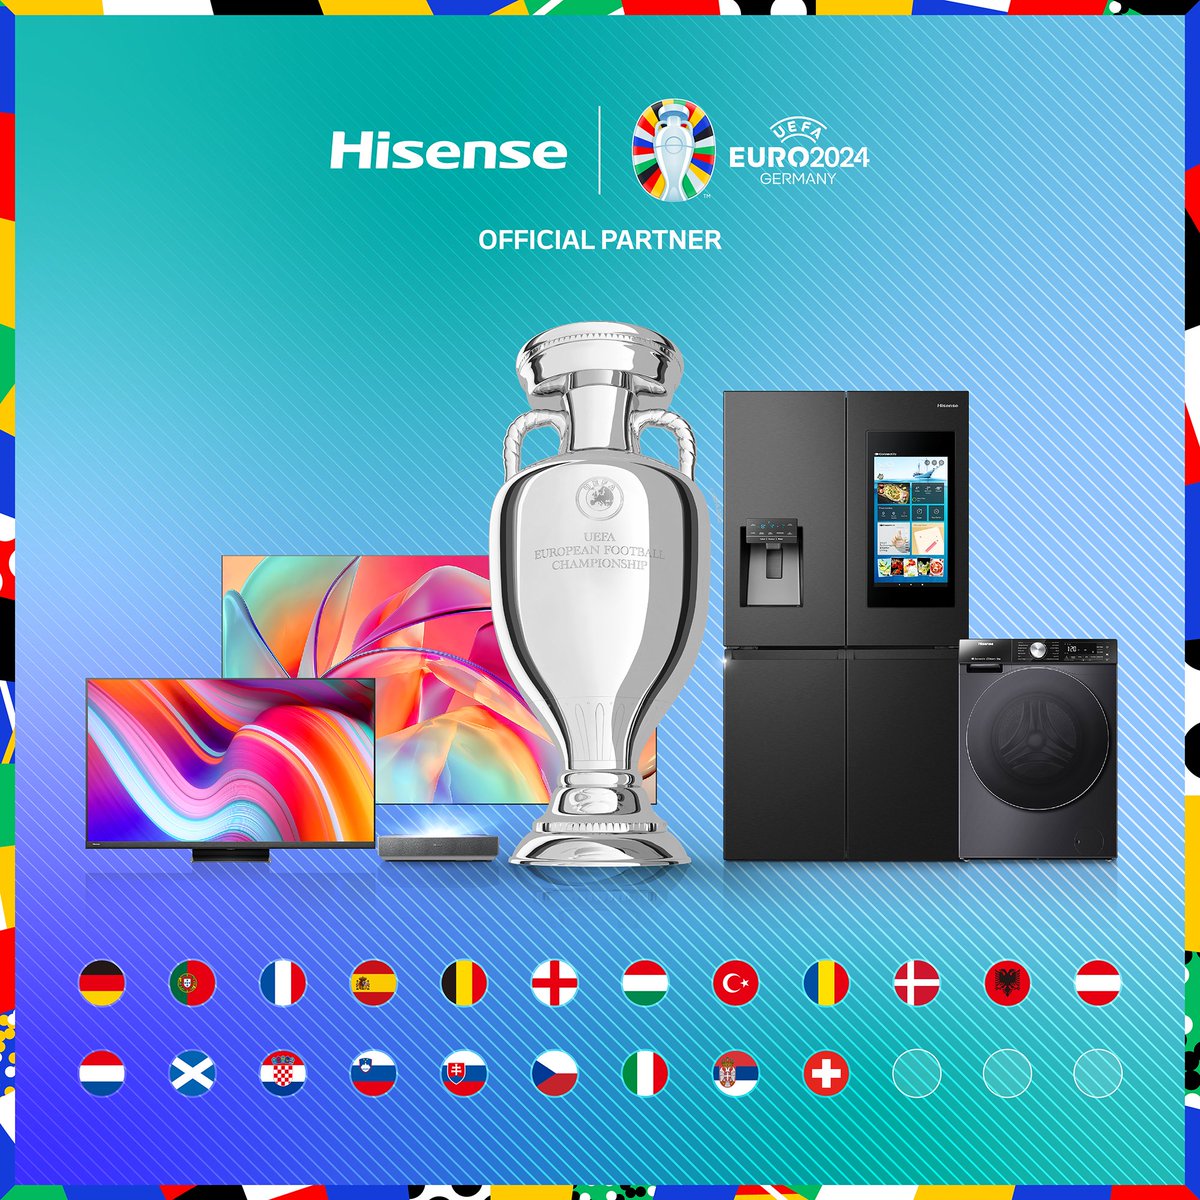 Given yesterday's UEFA EURO 2024ᵀᴹ draw, who do you see lifting the trophy in the summer? 🏆⚽️ #EURO2024 #HisenseEURO2024Challenge #EURO2024officialdraw